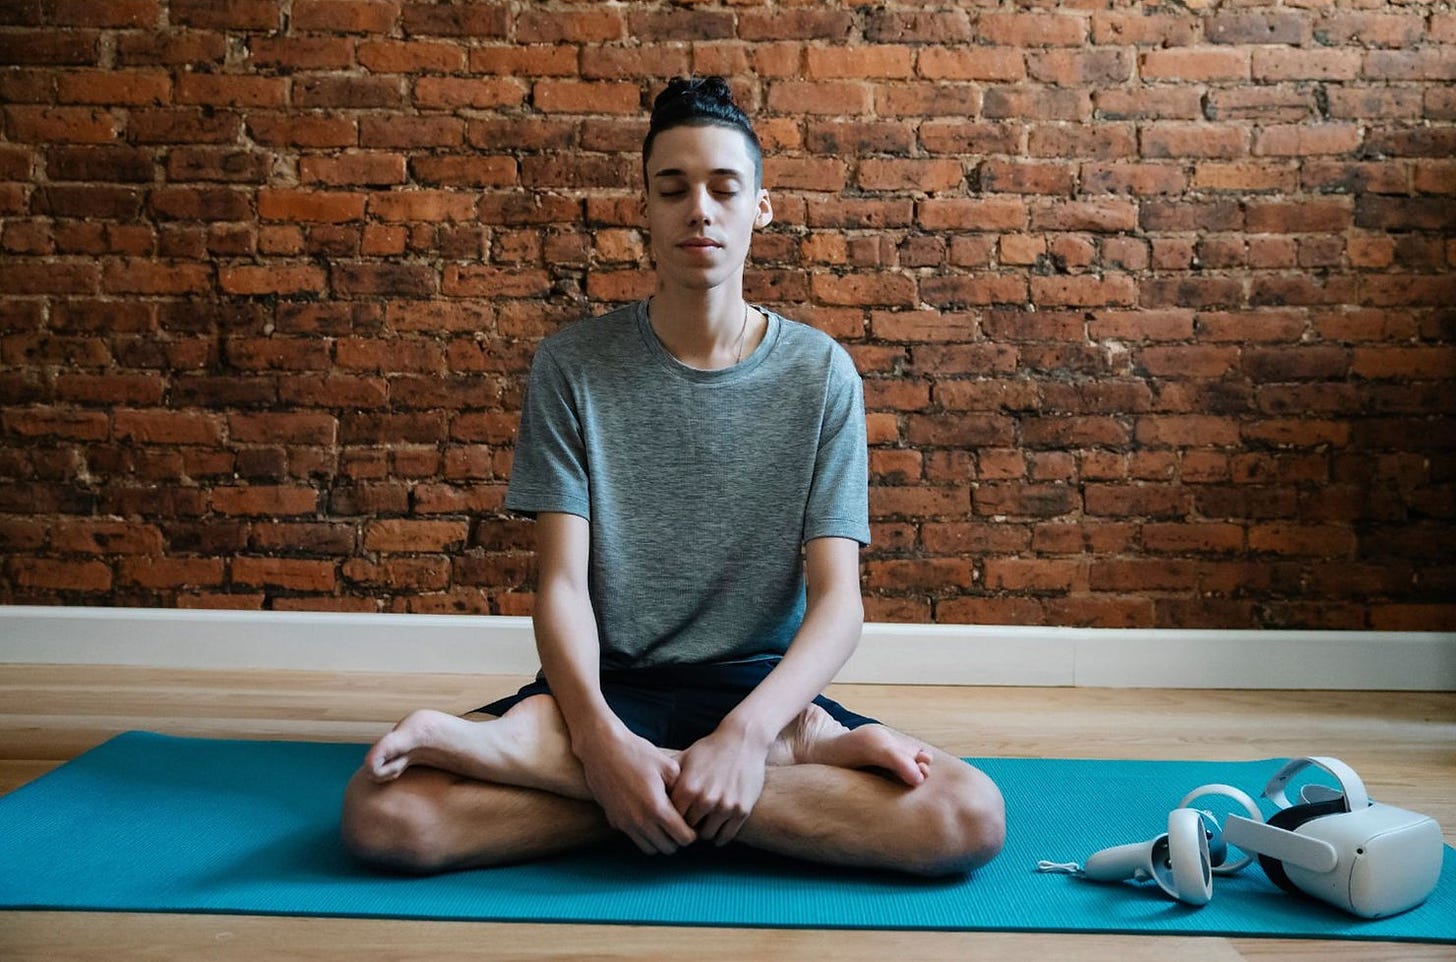 Posture matters when we want to stay awake during meditation